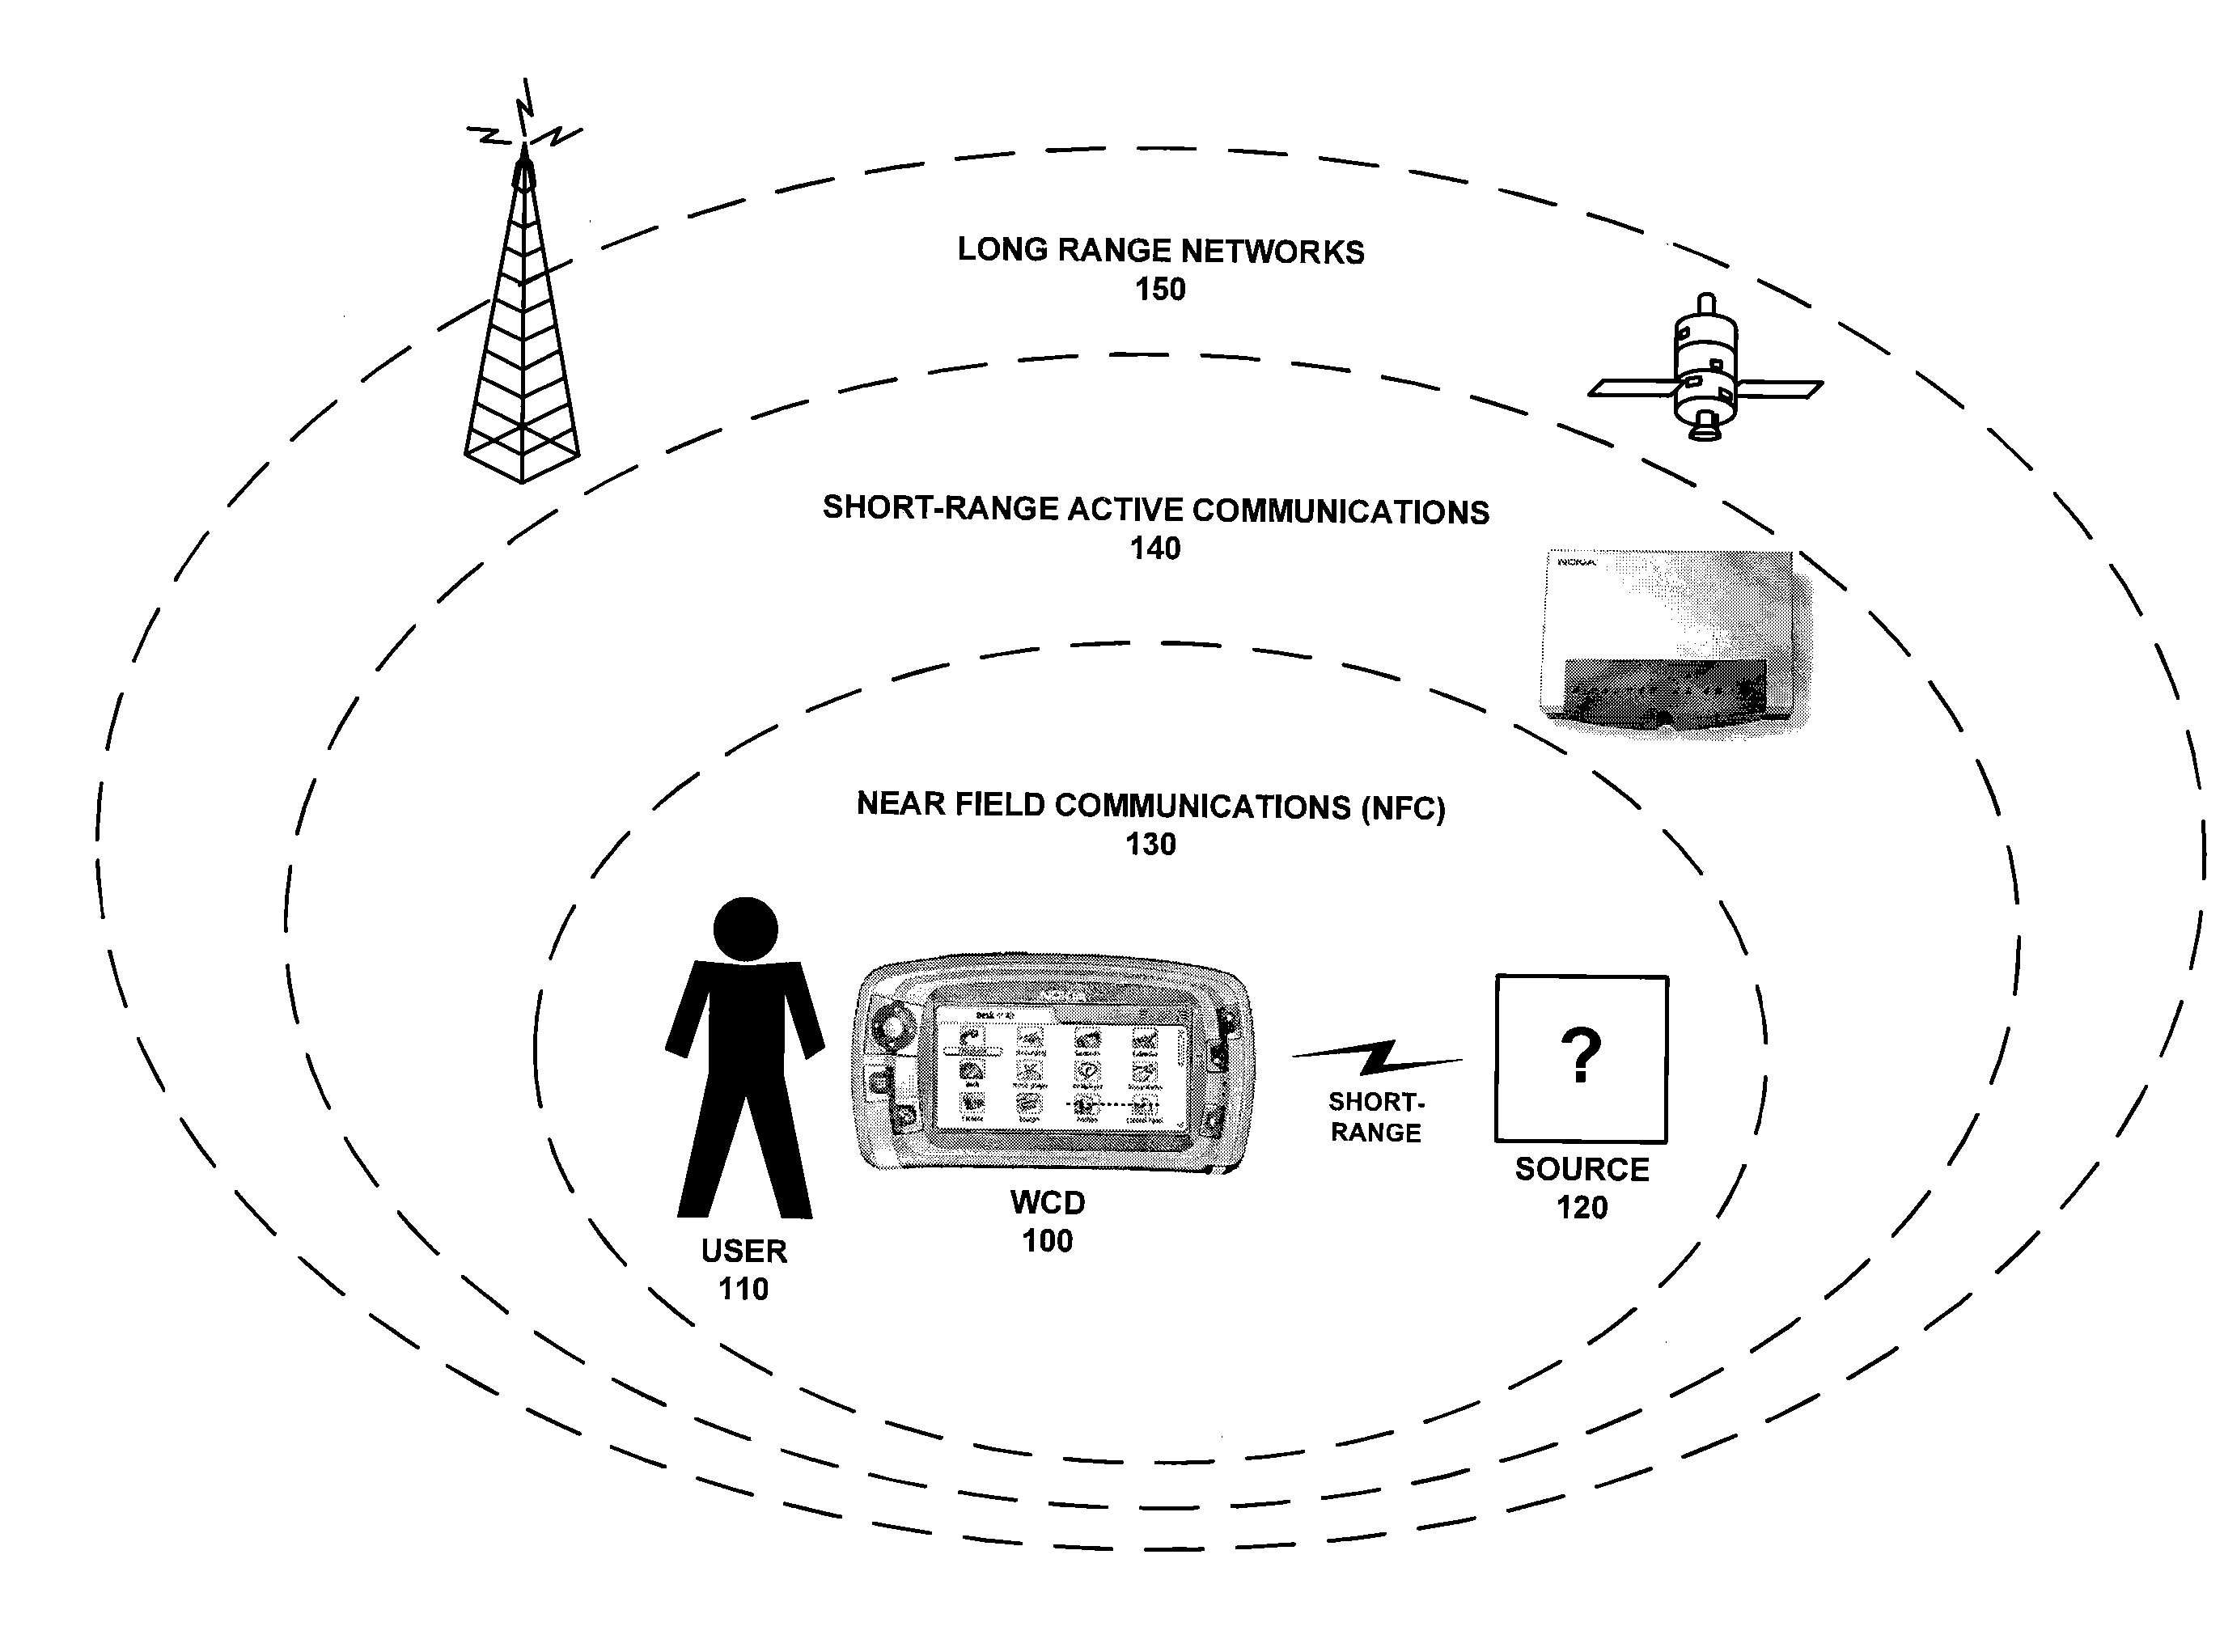 Multiradio scheduling including clock synchronization validity protection